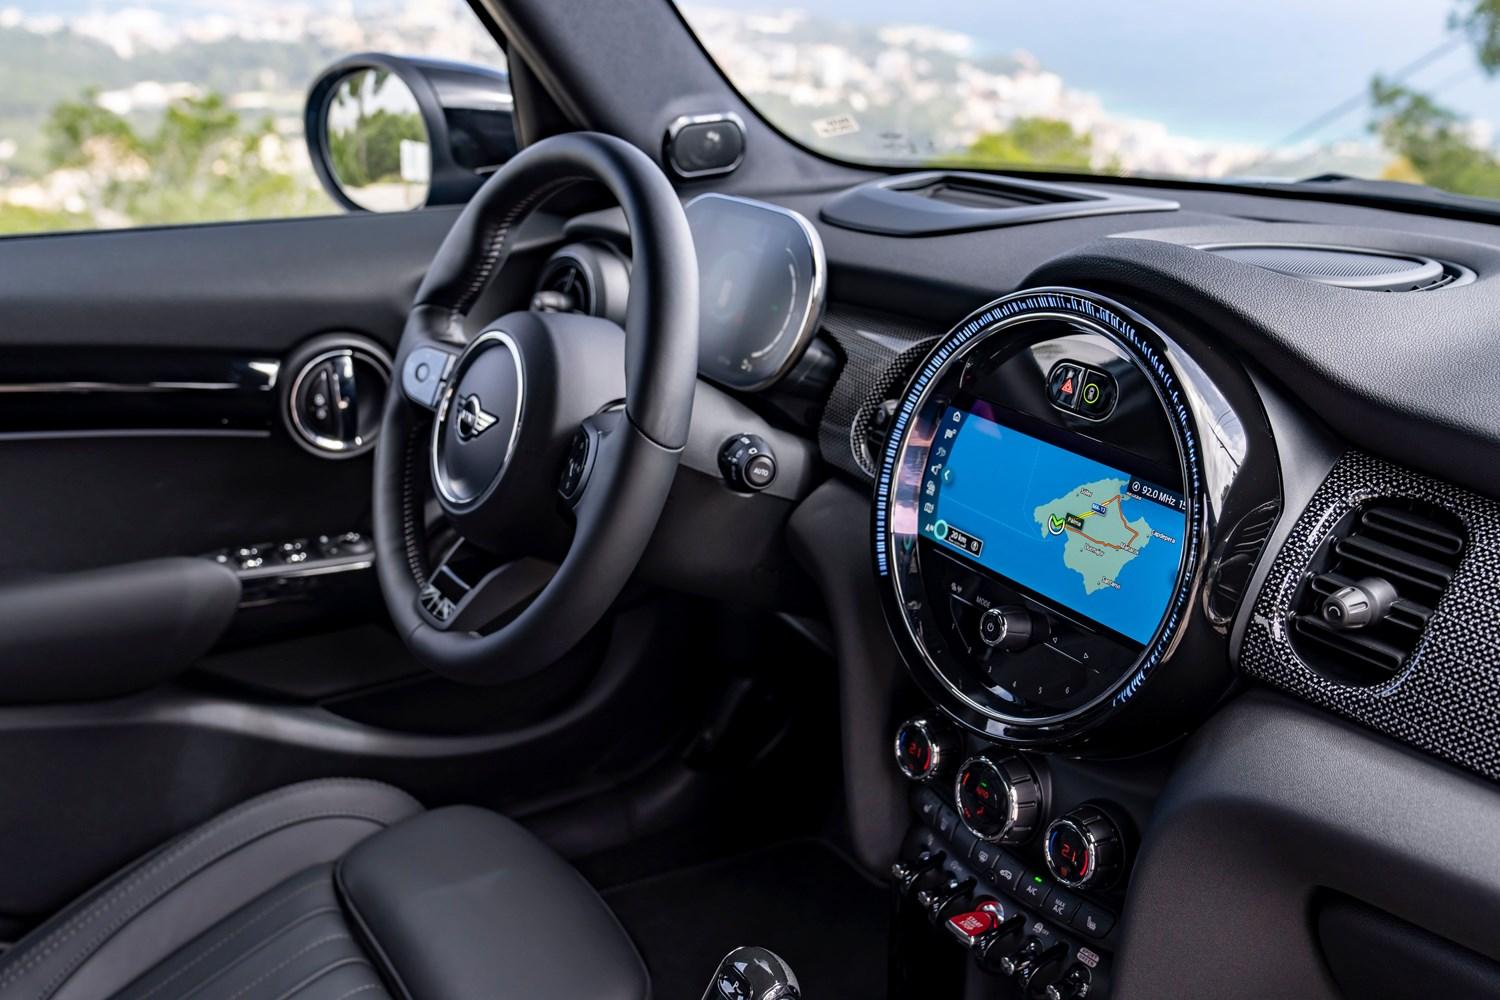 Interior view of the new MINI 5-Door Hatchback in blue, close-up of infotainment system with maps app loaded